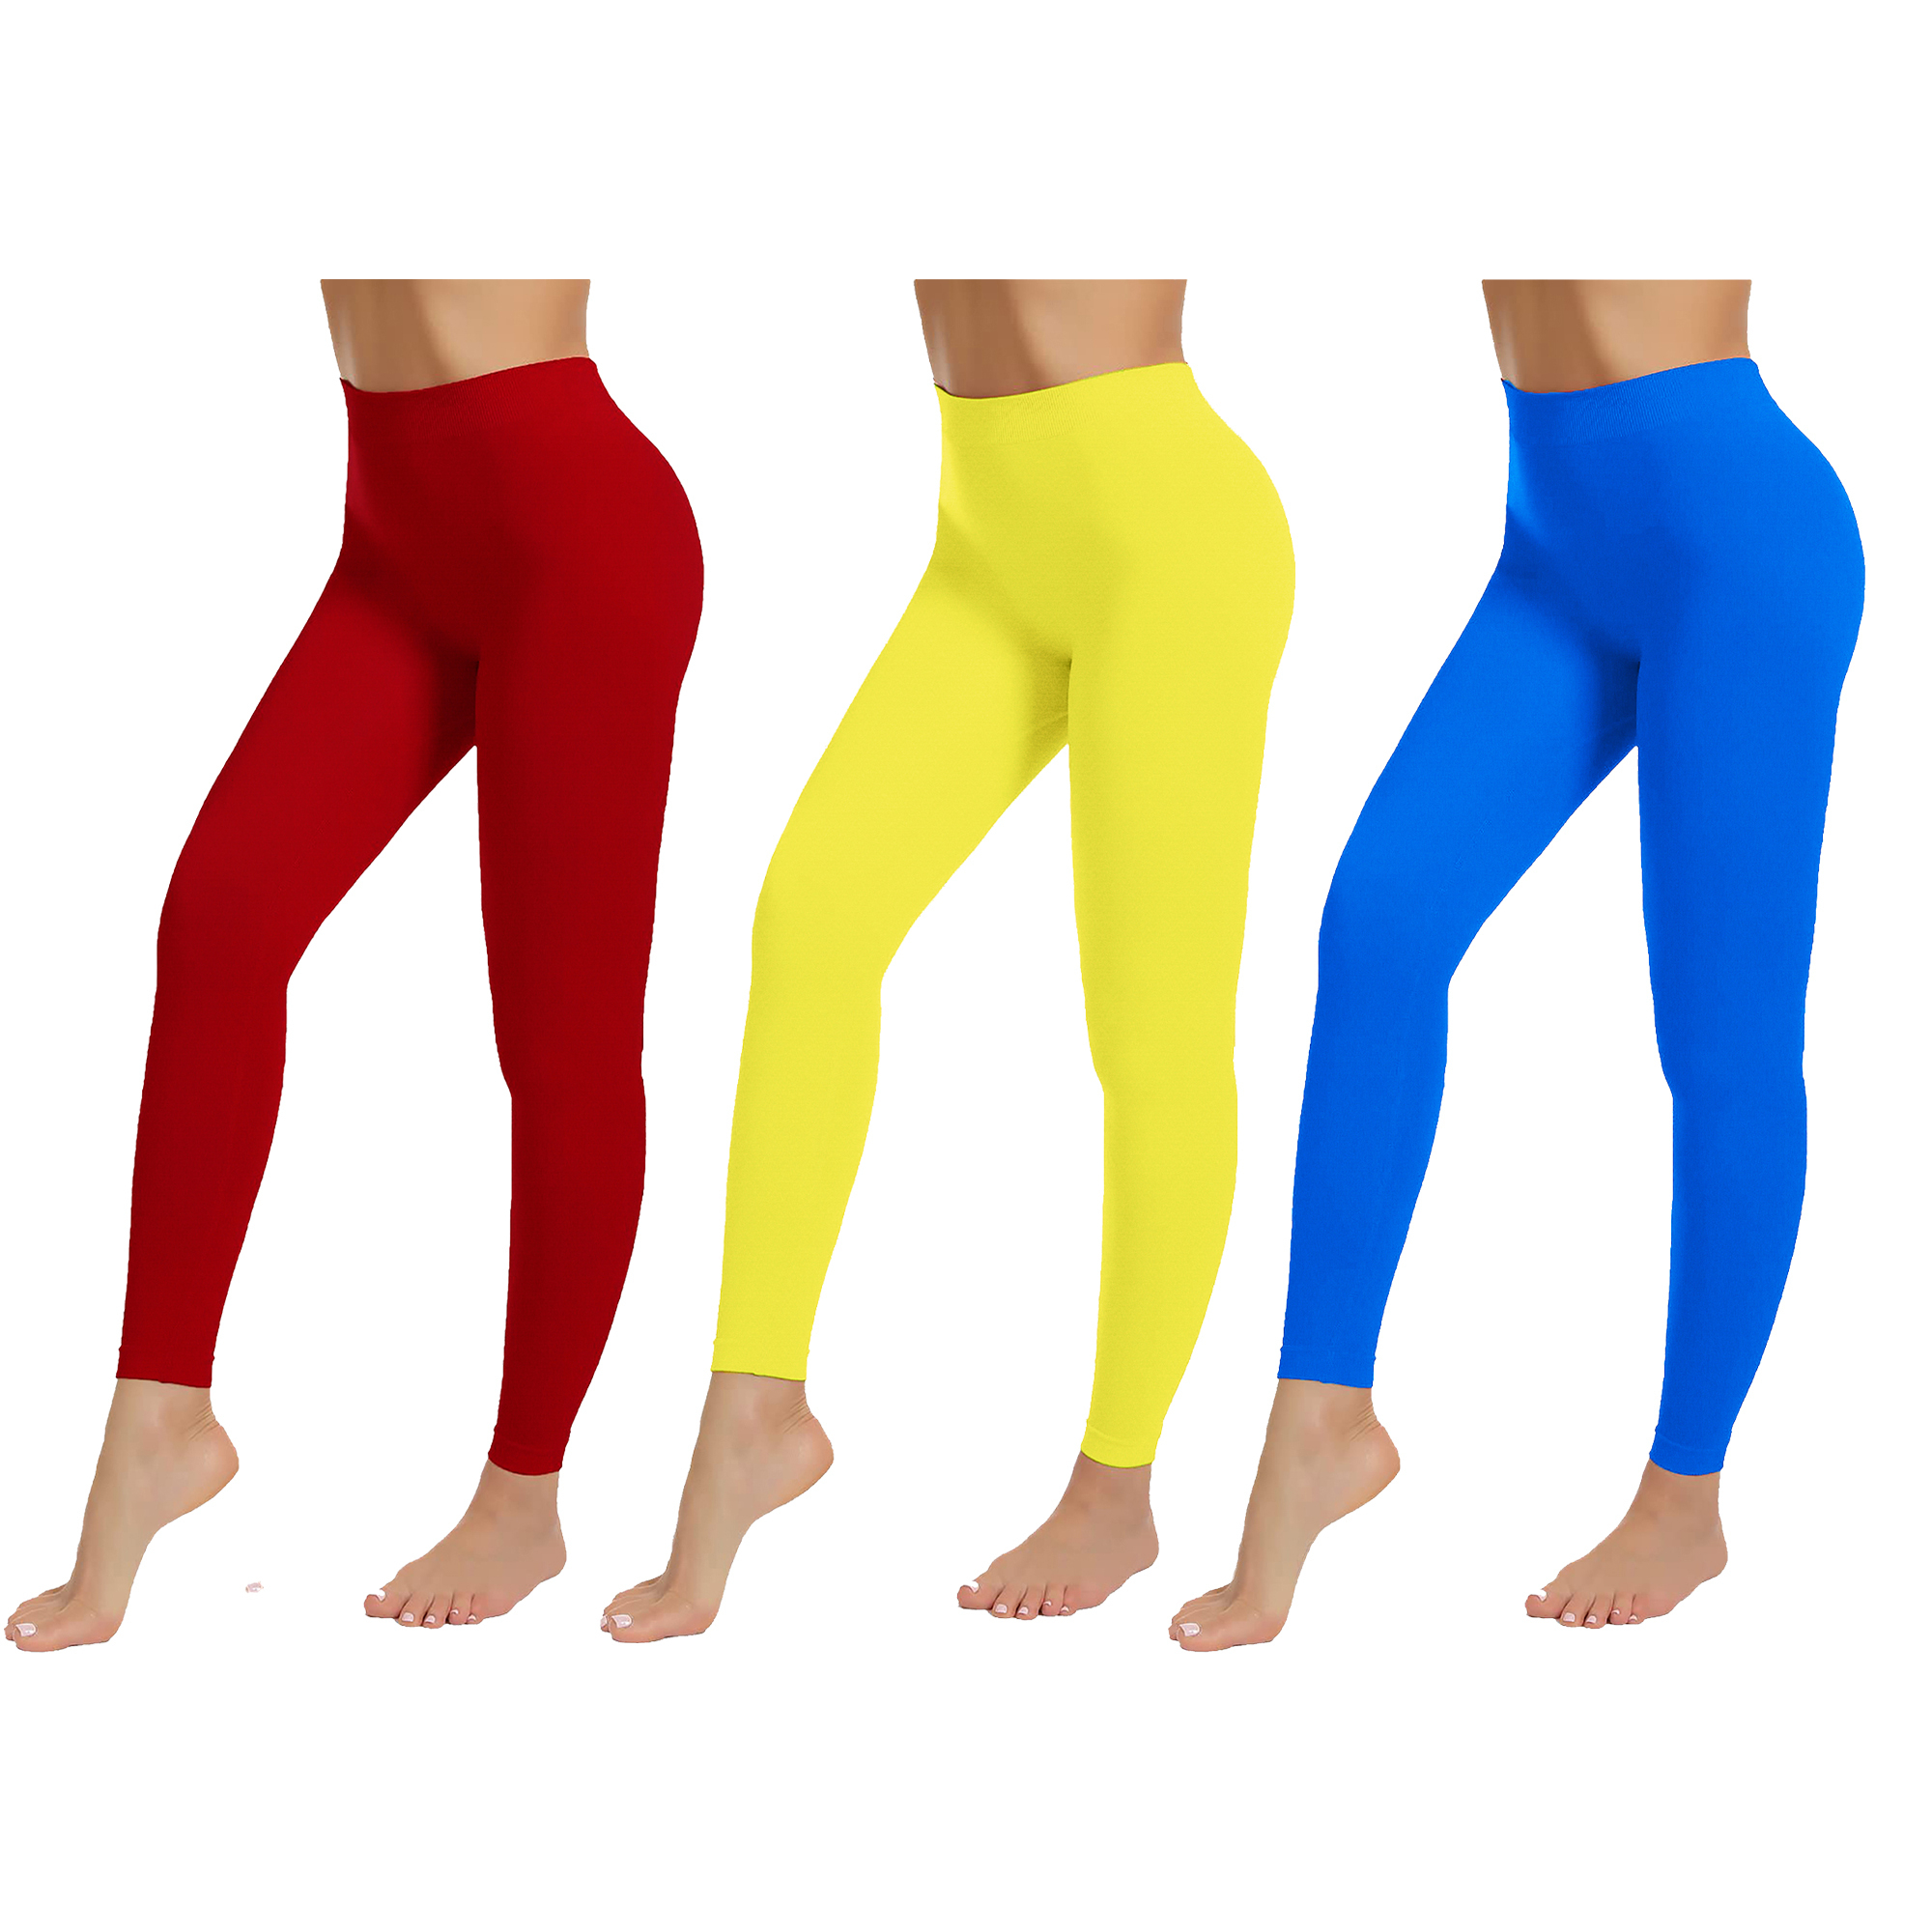 3-Pack: Women's High-Waist Ultra-Soft Stretchy Solid Fitness Yoga Leggings Pants - BLUE, XS